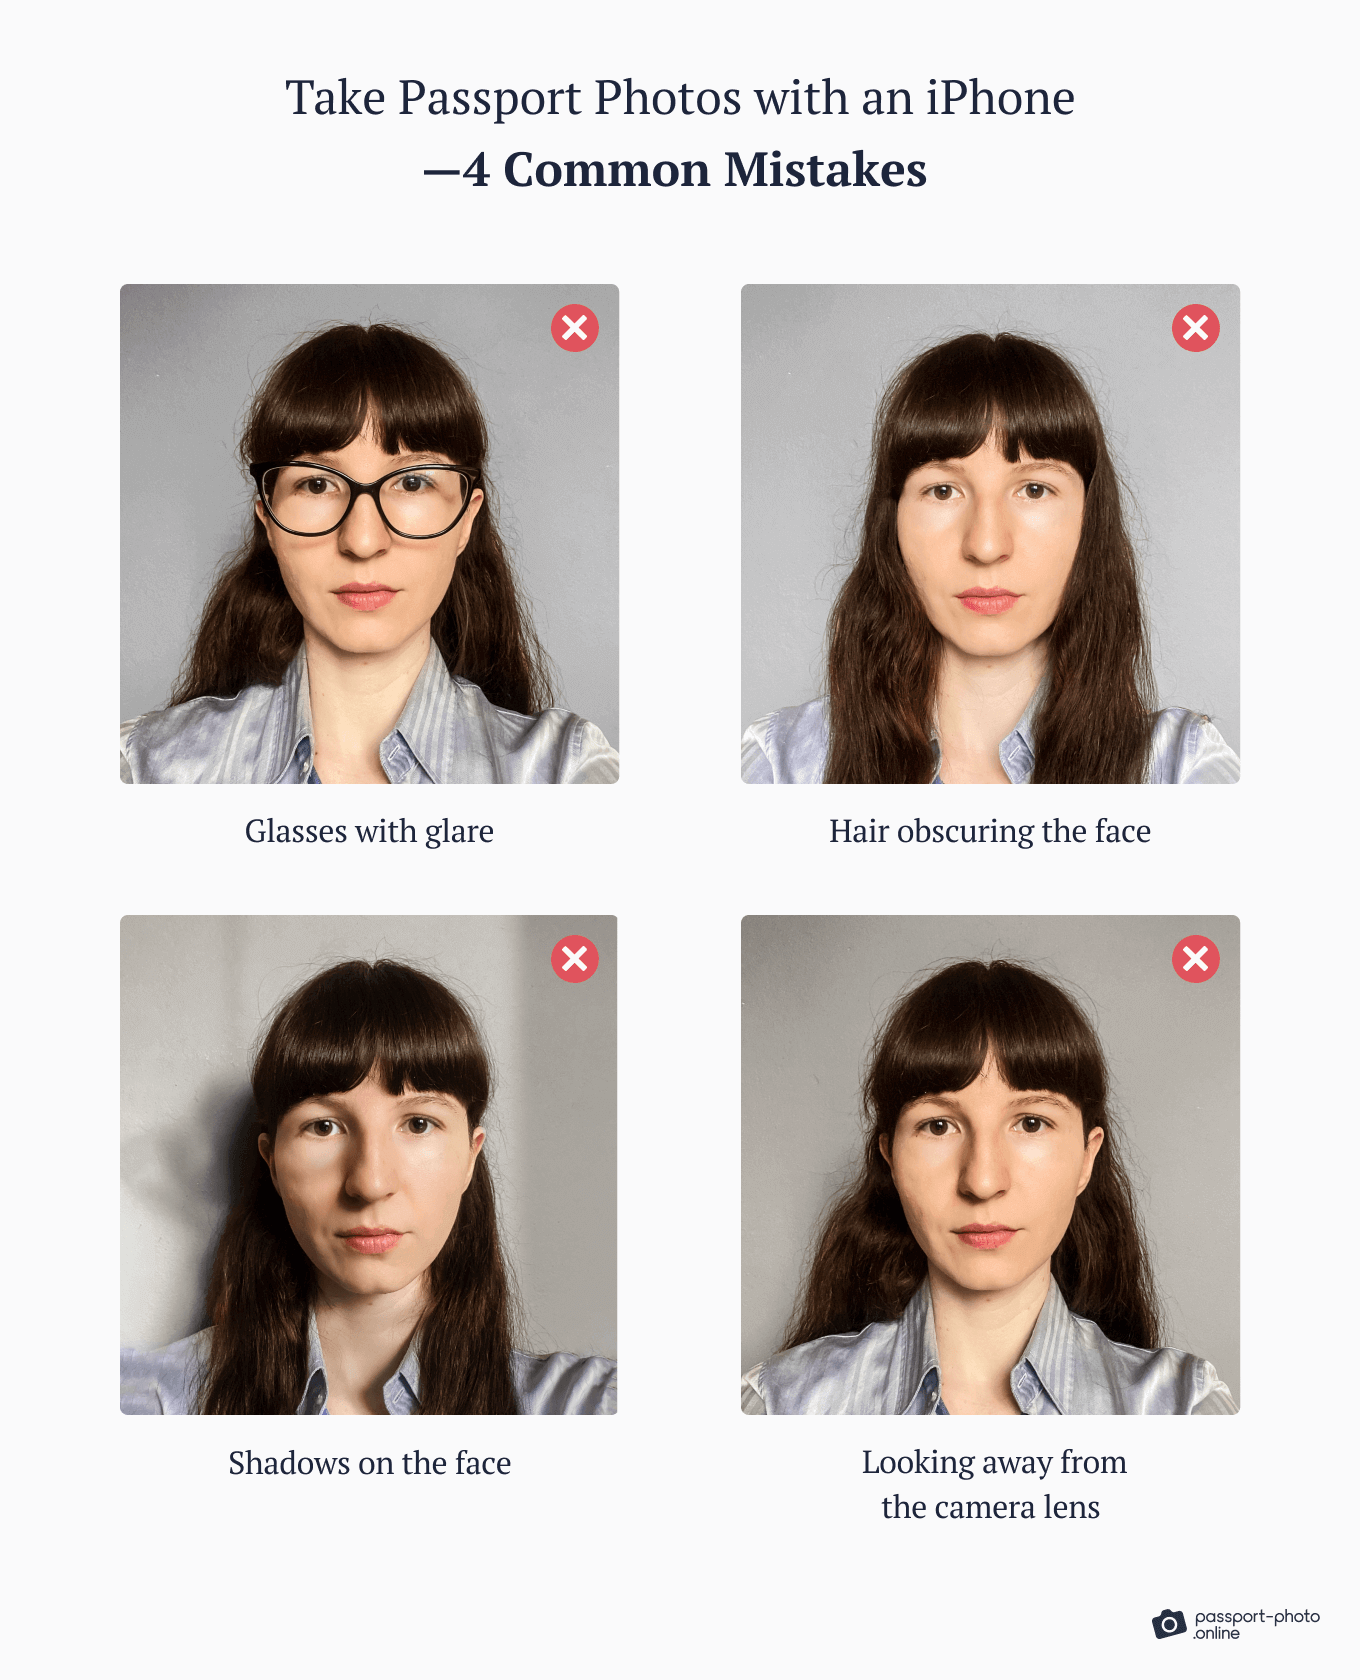 Common mistakes when taking passport photos at home.